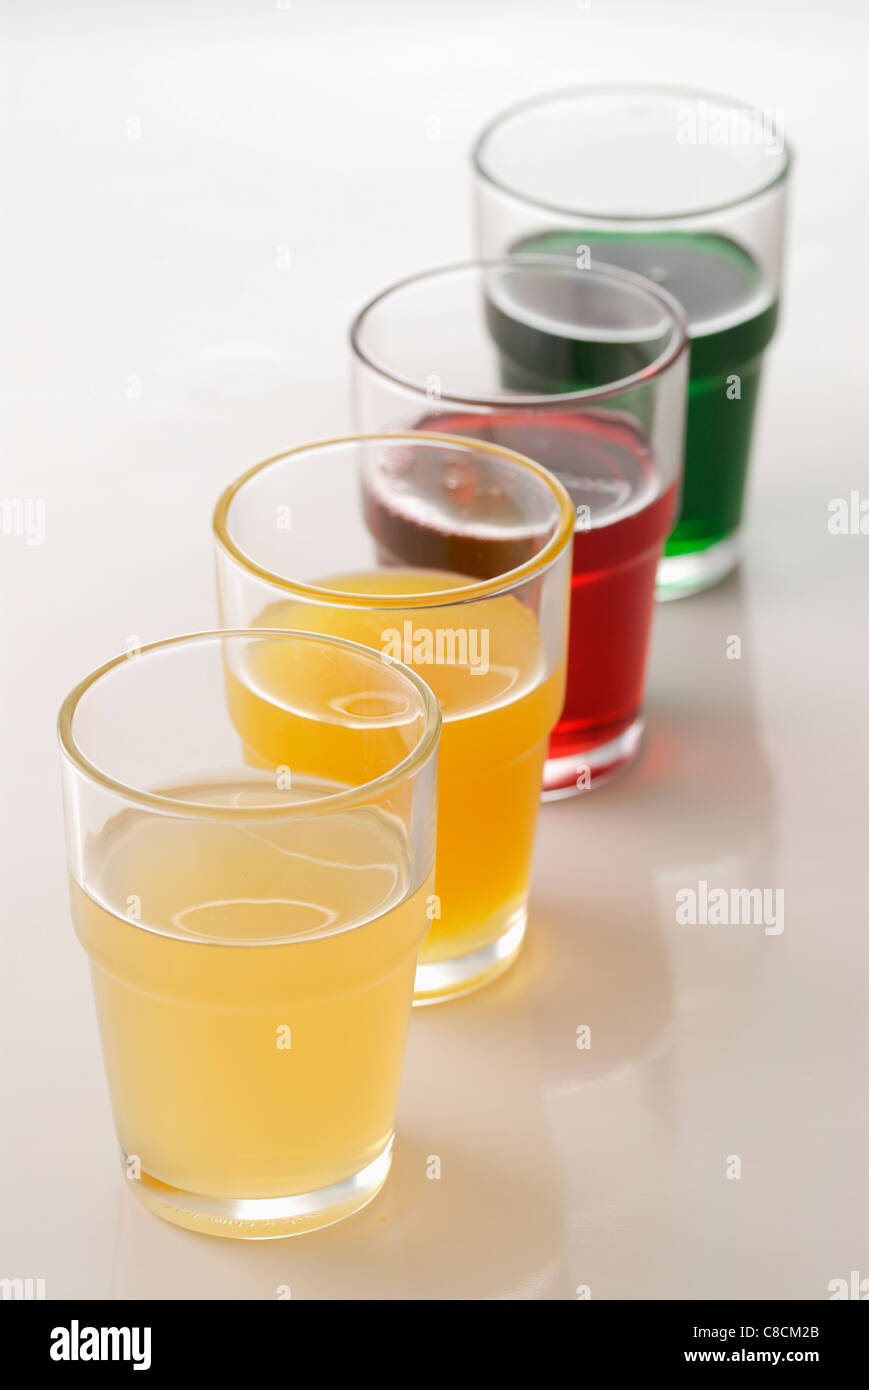 Assorted glasses of syrups Stock Photo